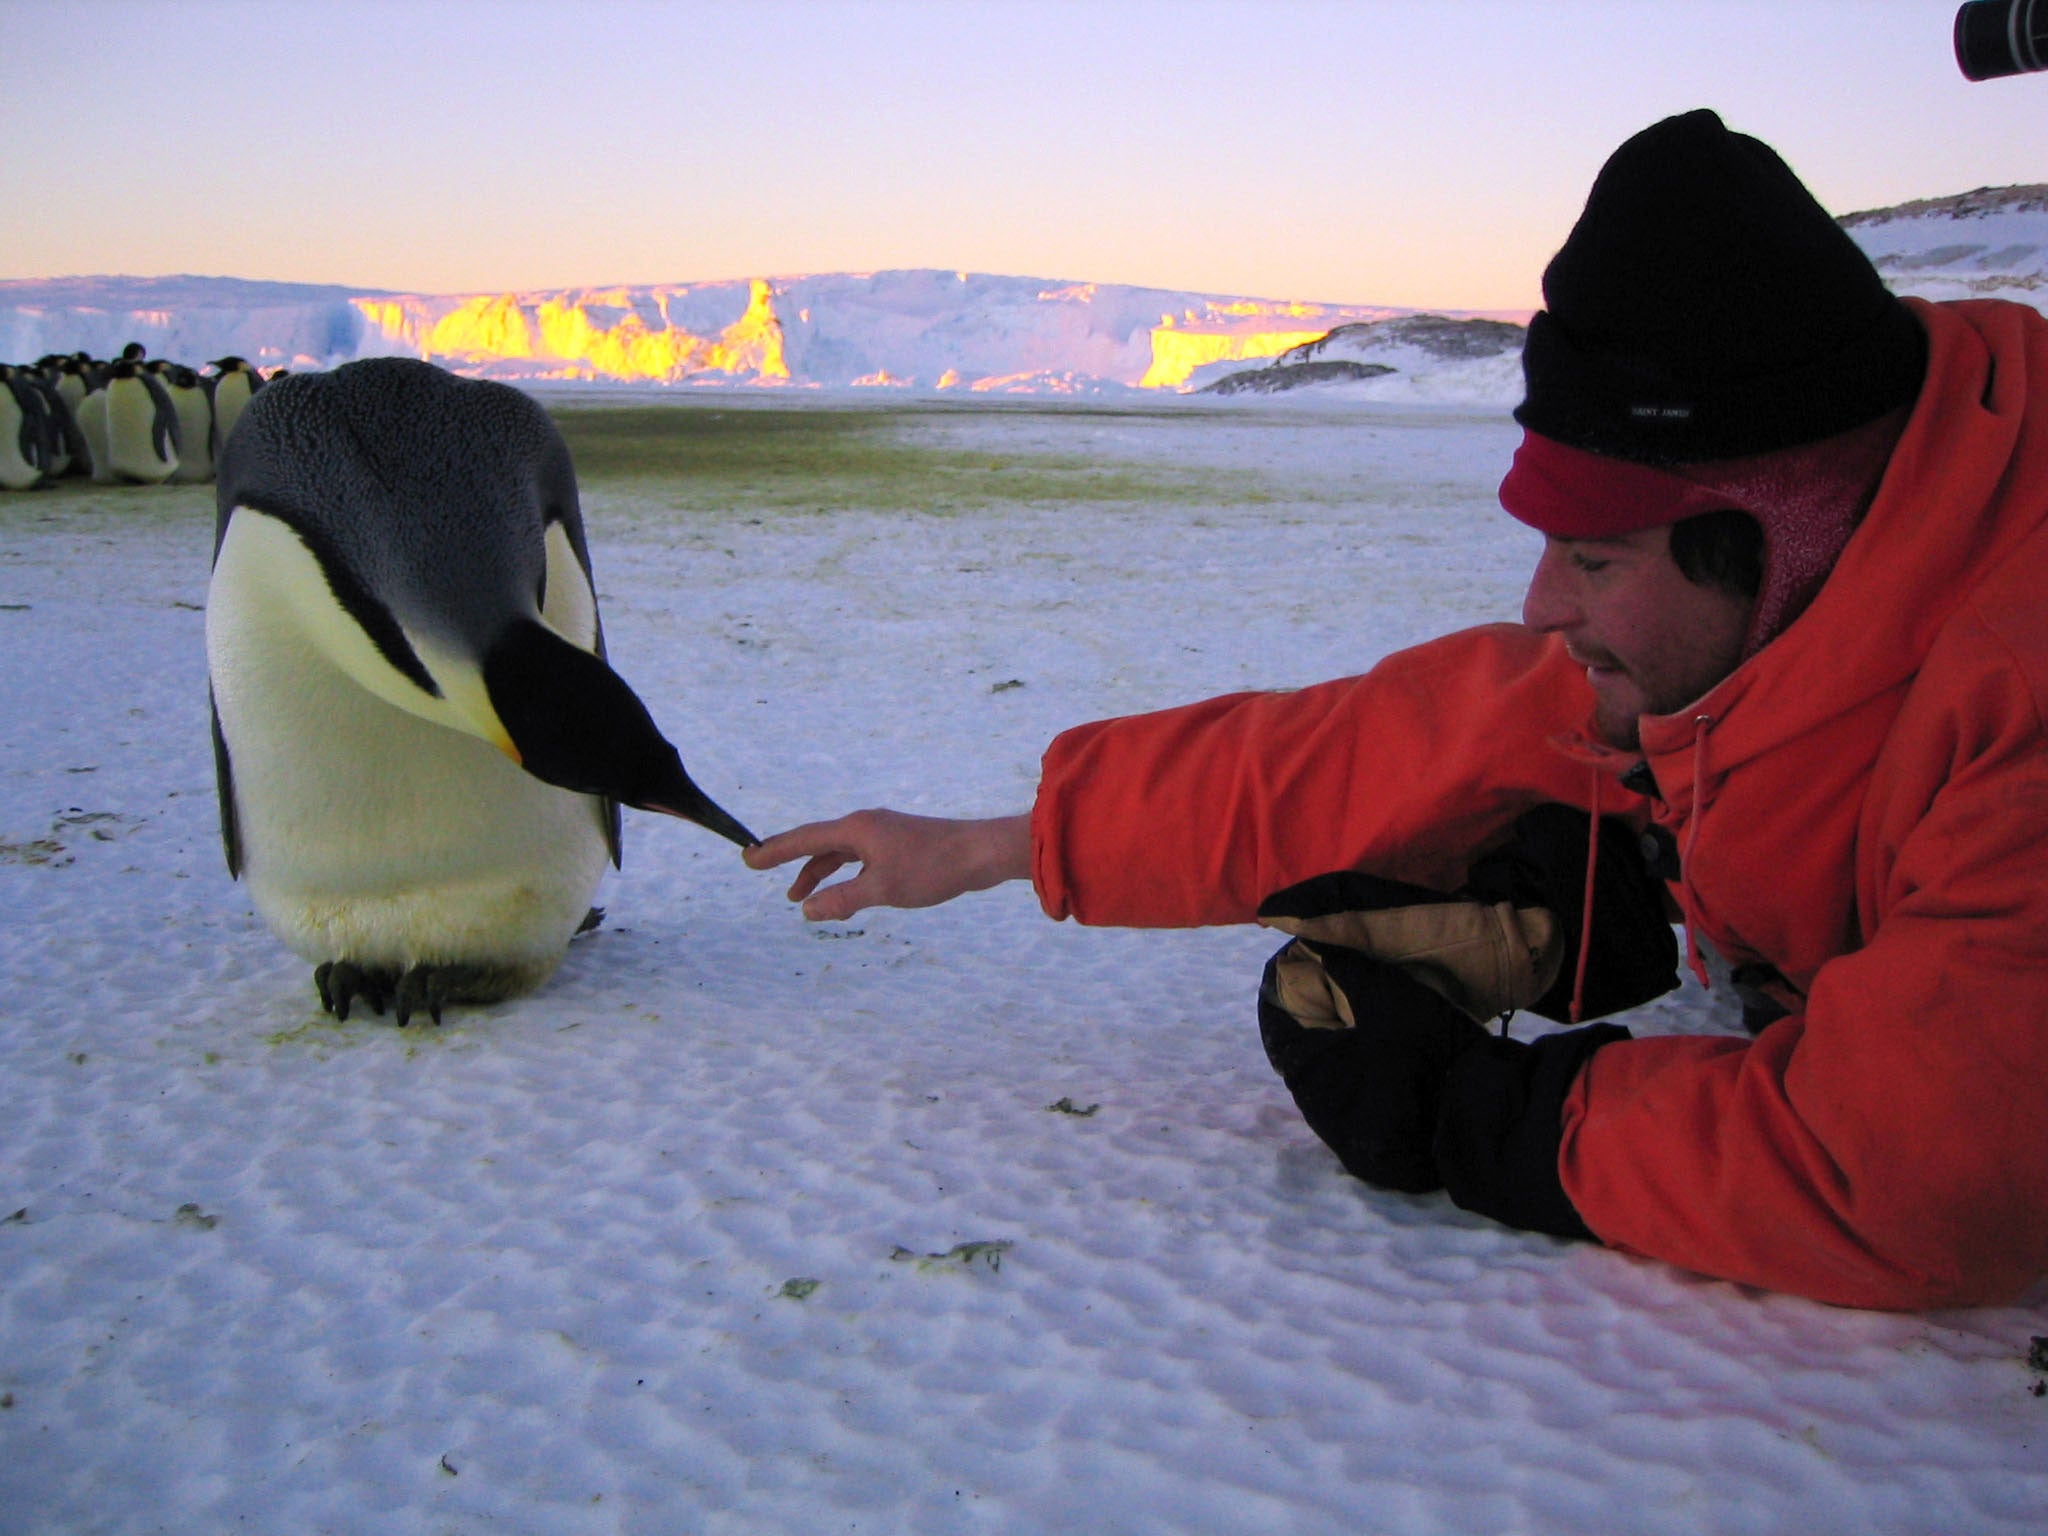 Director Luc Jacquet wants to raise awareness of the plight of animals in a warming Antarctica